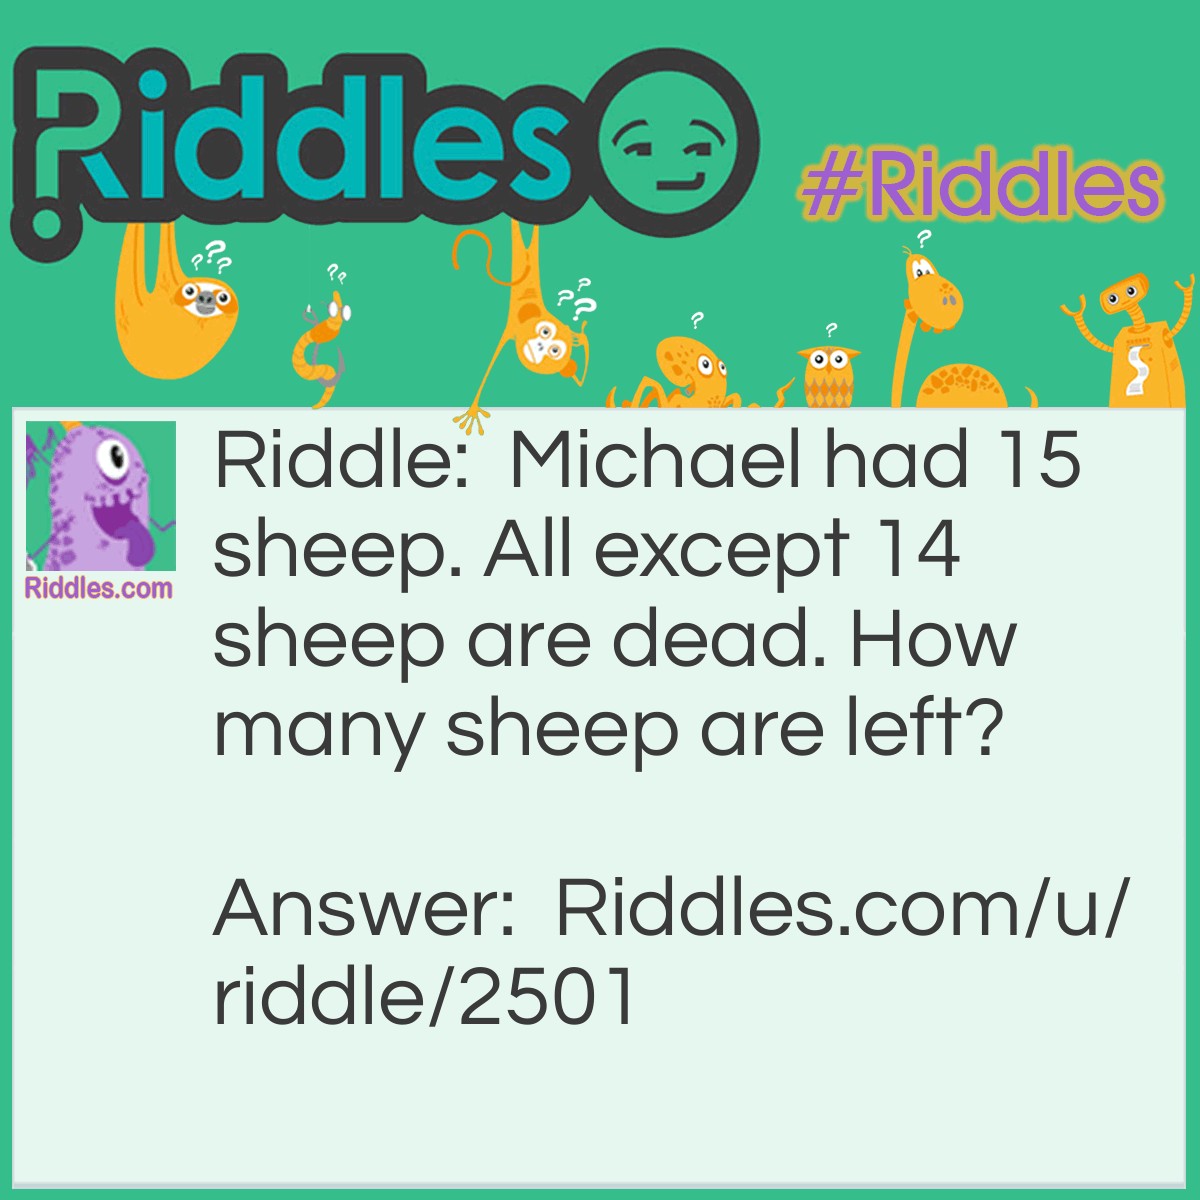 Riddle: Michael had 15 sheep. All except 14 sheep are dead. How many sheep are left? Answer: 14, because all except 14 are dead. One sheep is died.